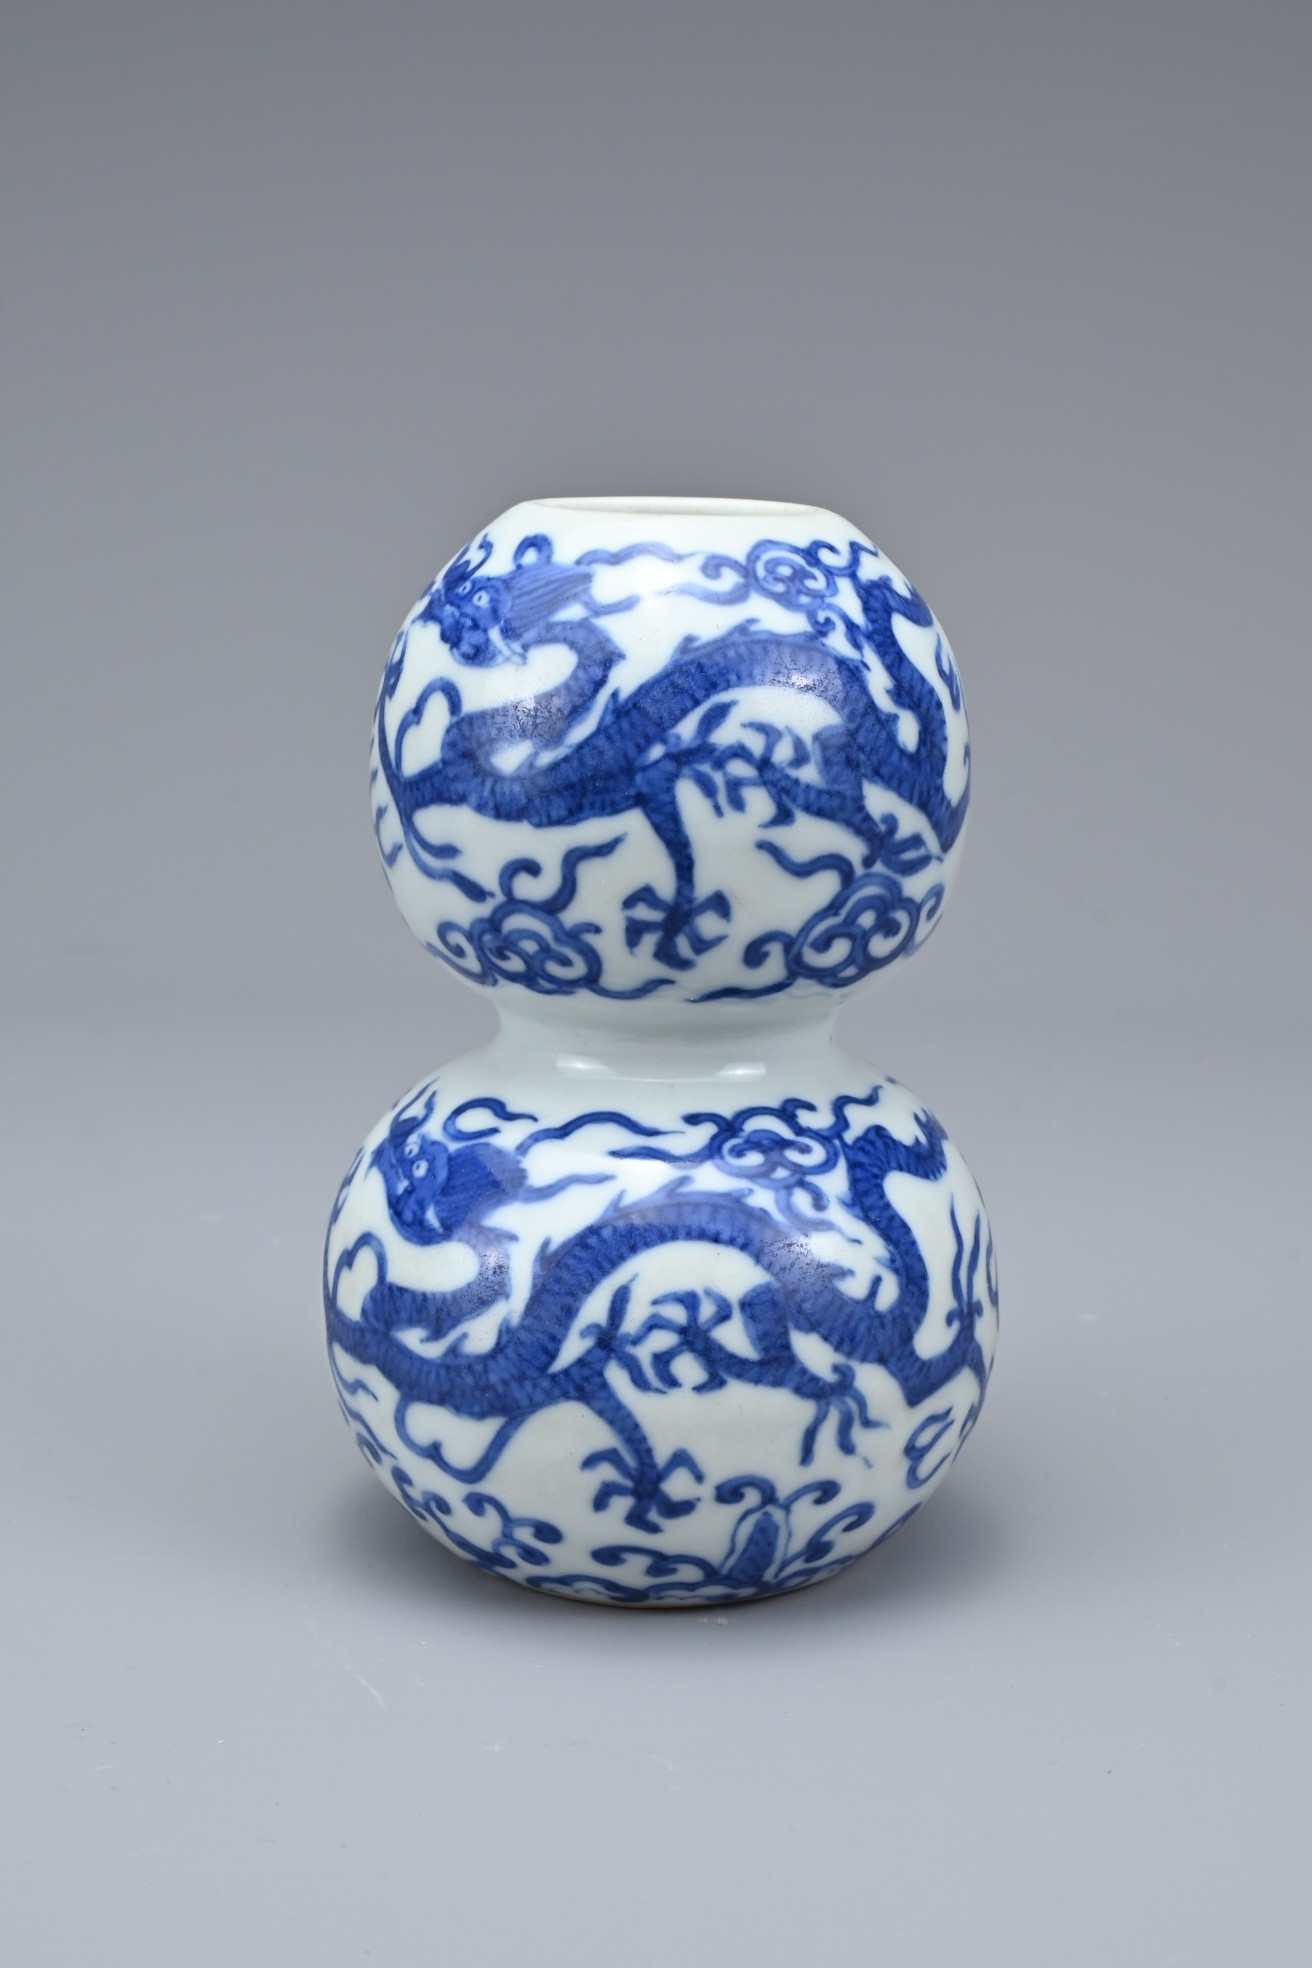 A CHINESE BLUE AND WHITE PORCELAIN DOUBLE-GOURD DRAGON VASE, MARK AND PERIOD OF JIAJING (1522-1566) - Image 5 of 9